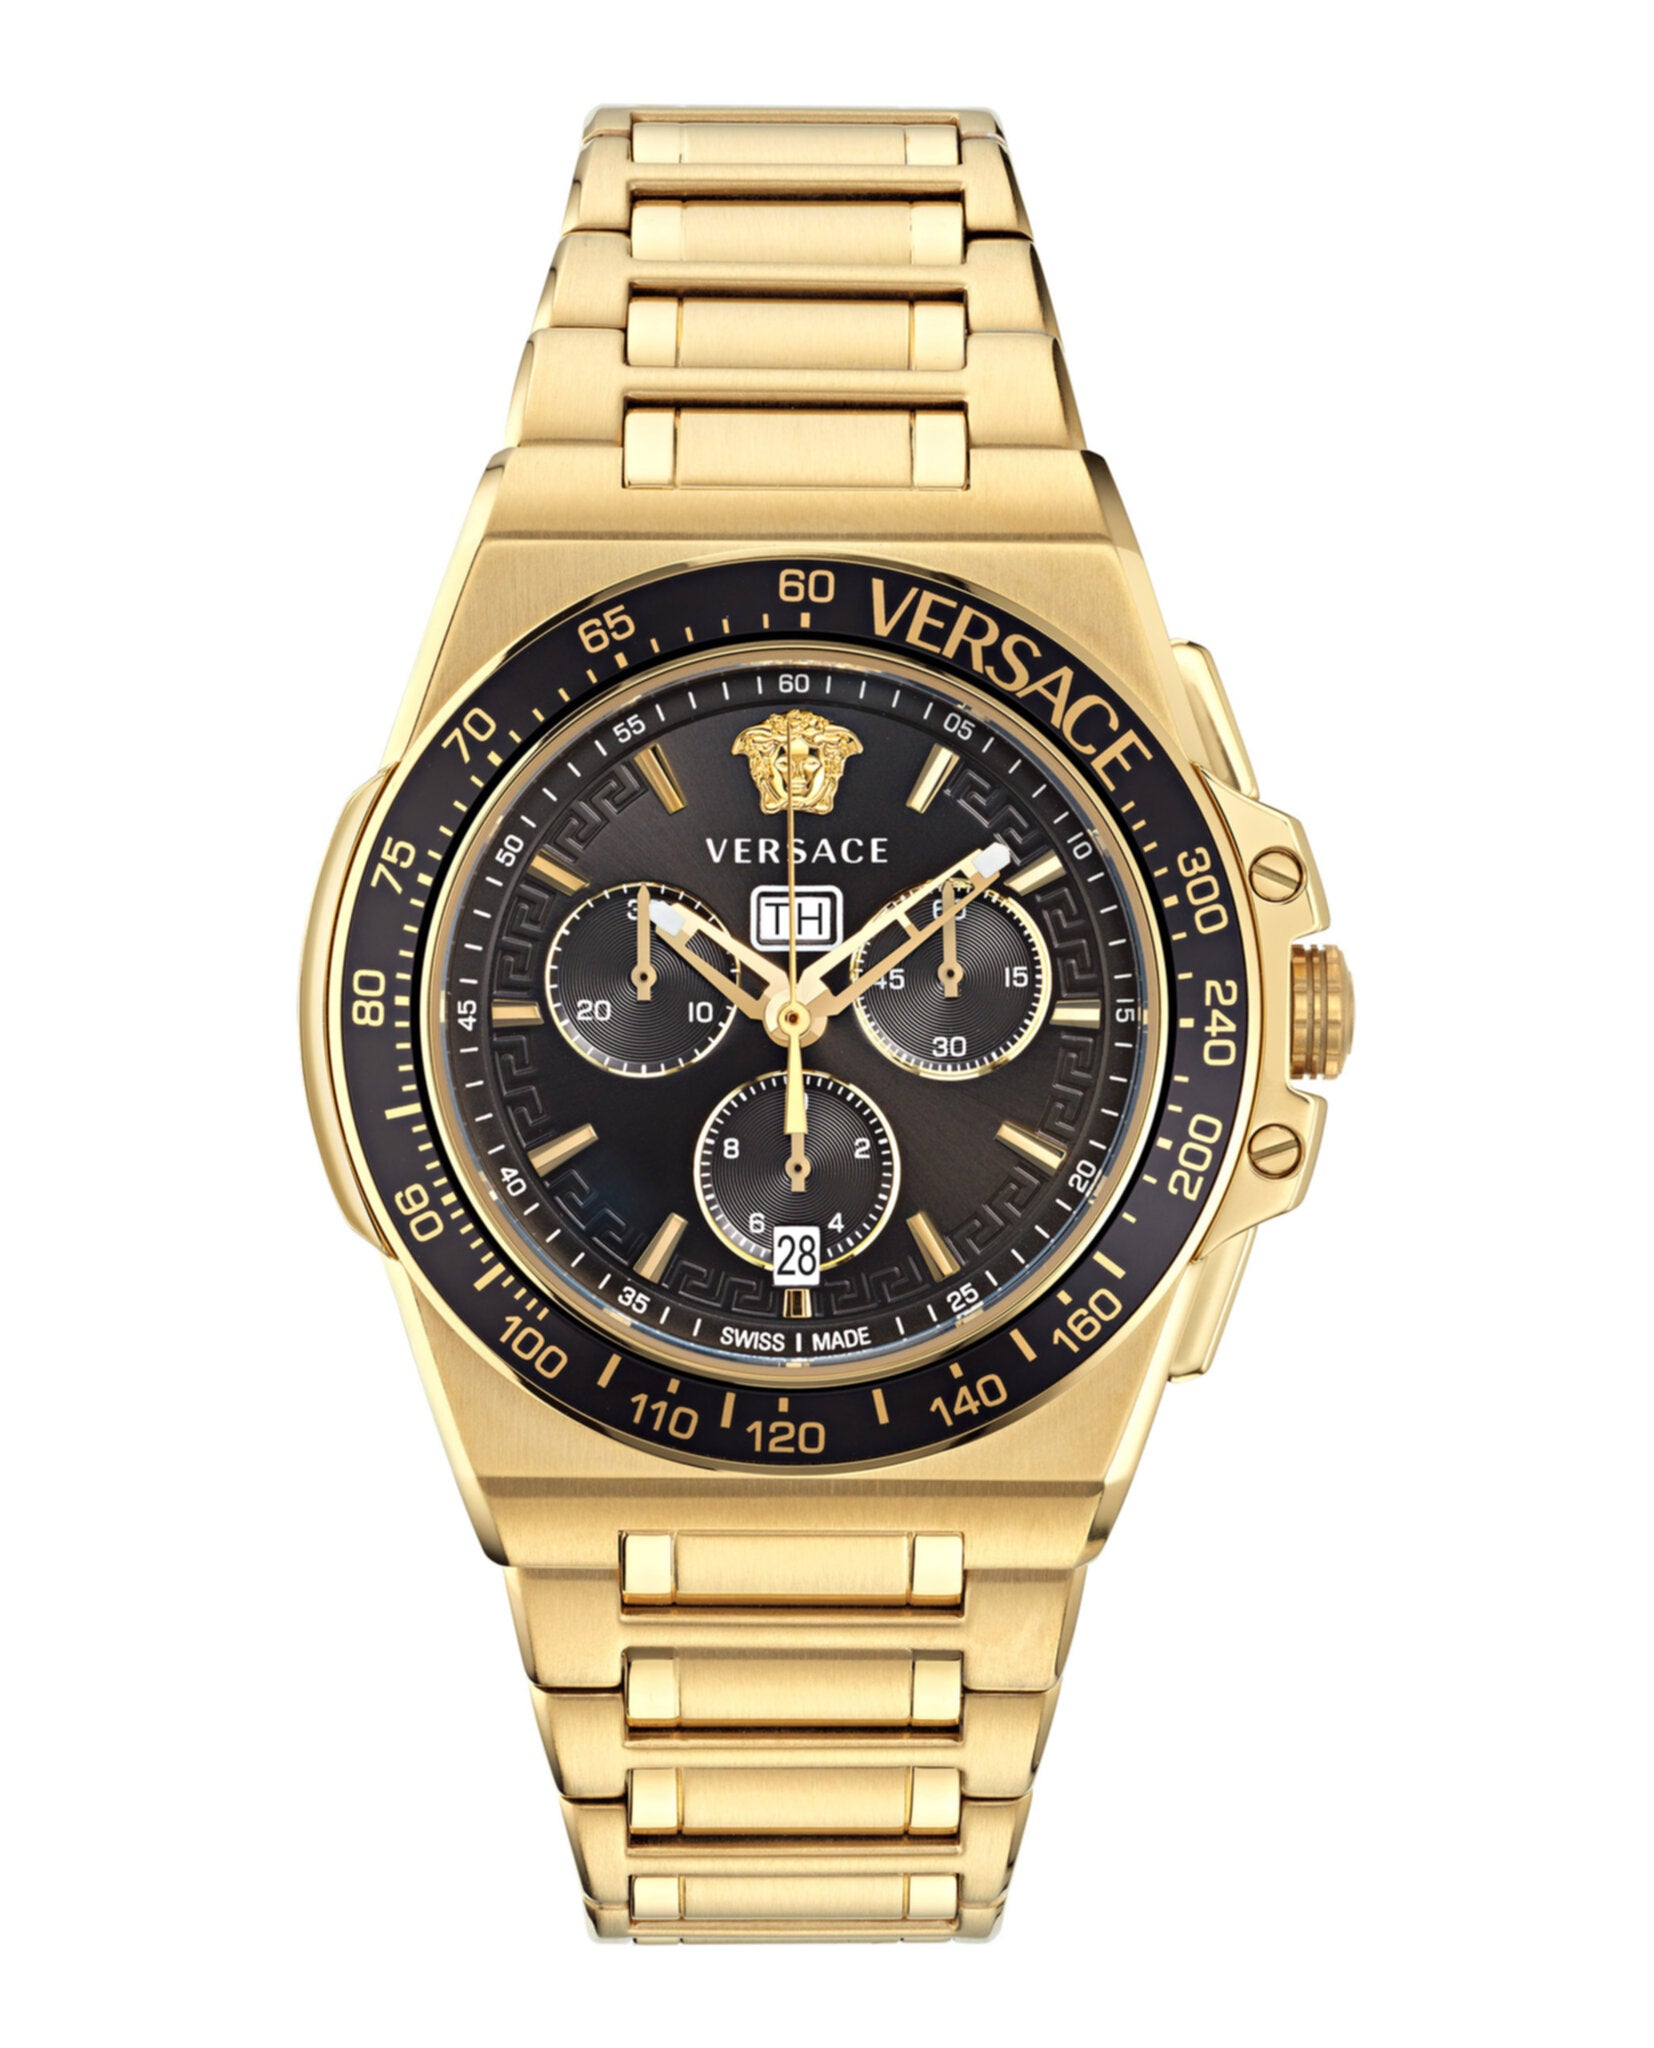 MadaLuxe Versace Watches | Greca Chrono Extreme Madaluxe – Mens Time Time